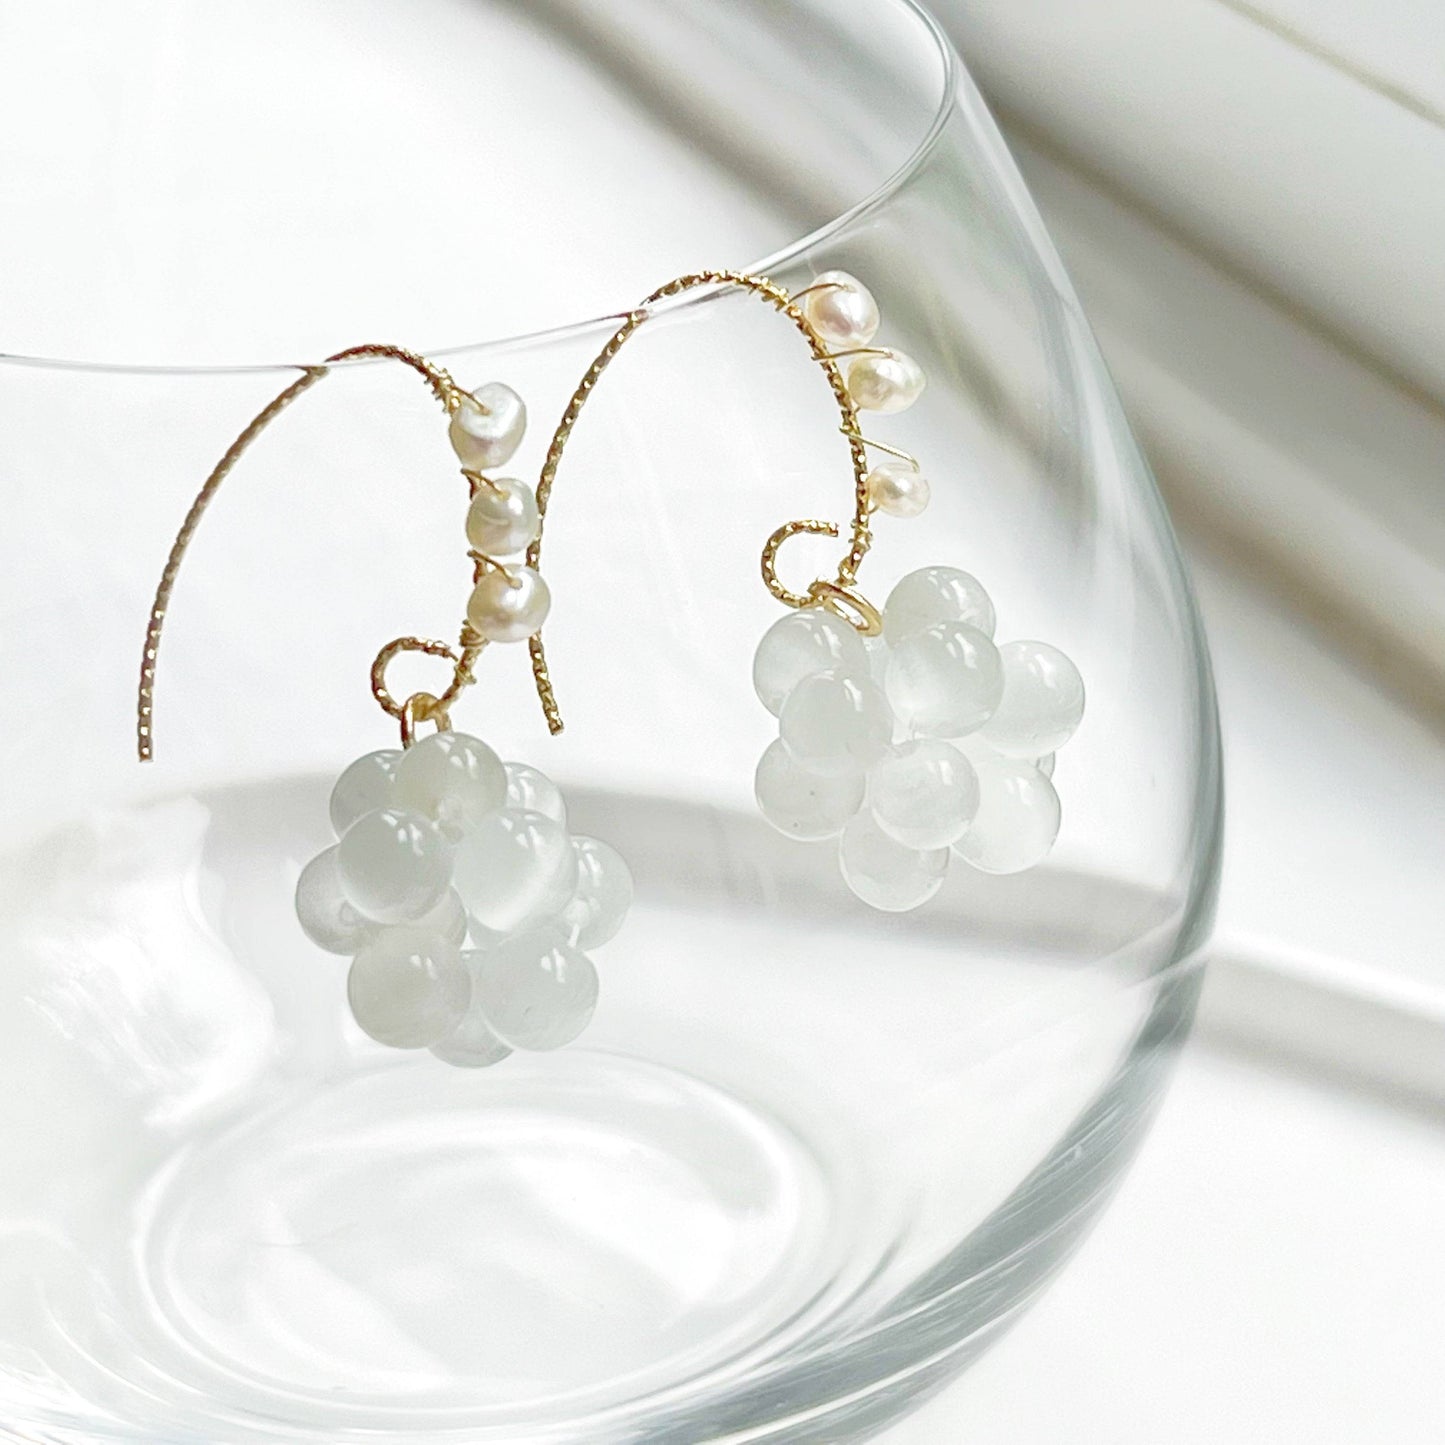 White Cats Eye Stone Beads and Pearls Drop Earrings-Ninaouity